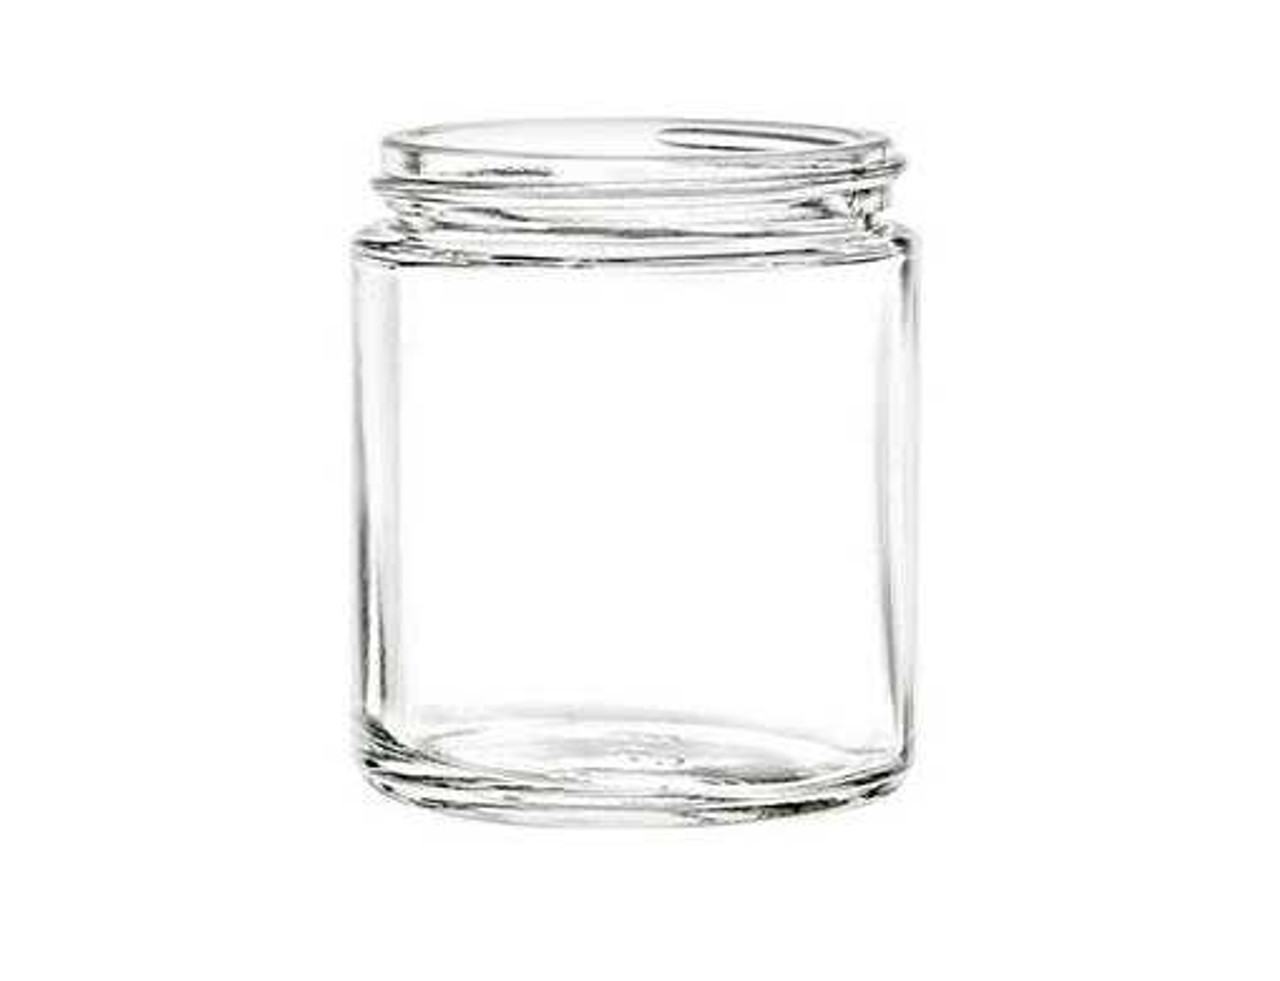 https://cdn11.bigcommerce.com/s-1ybtx/images/stencil/1280x1280/products/1157/6446/2-oz-Straight-Side-Glass-Jar-with-Shaker-Spice-Caps_3675__03269.1674335323.jpg?c=2?imbypass=on